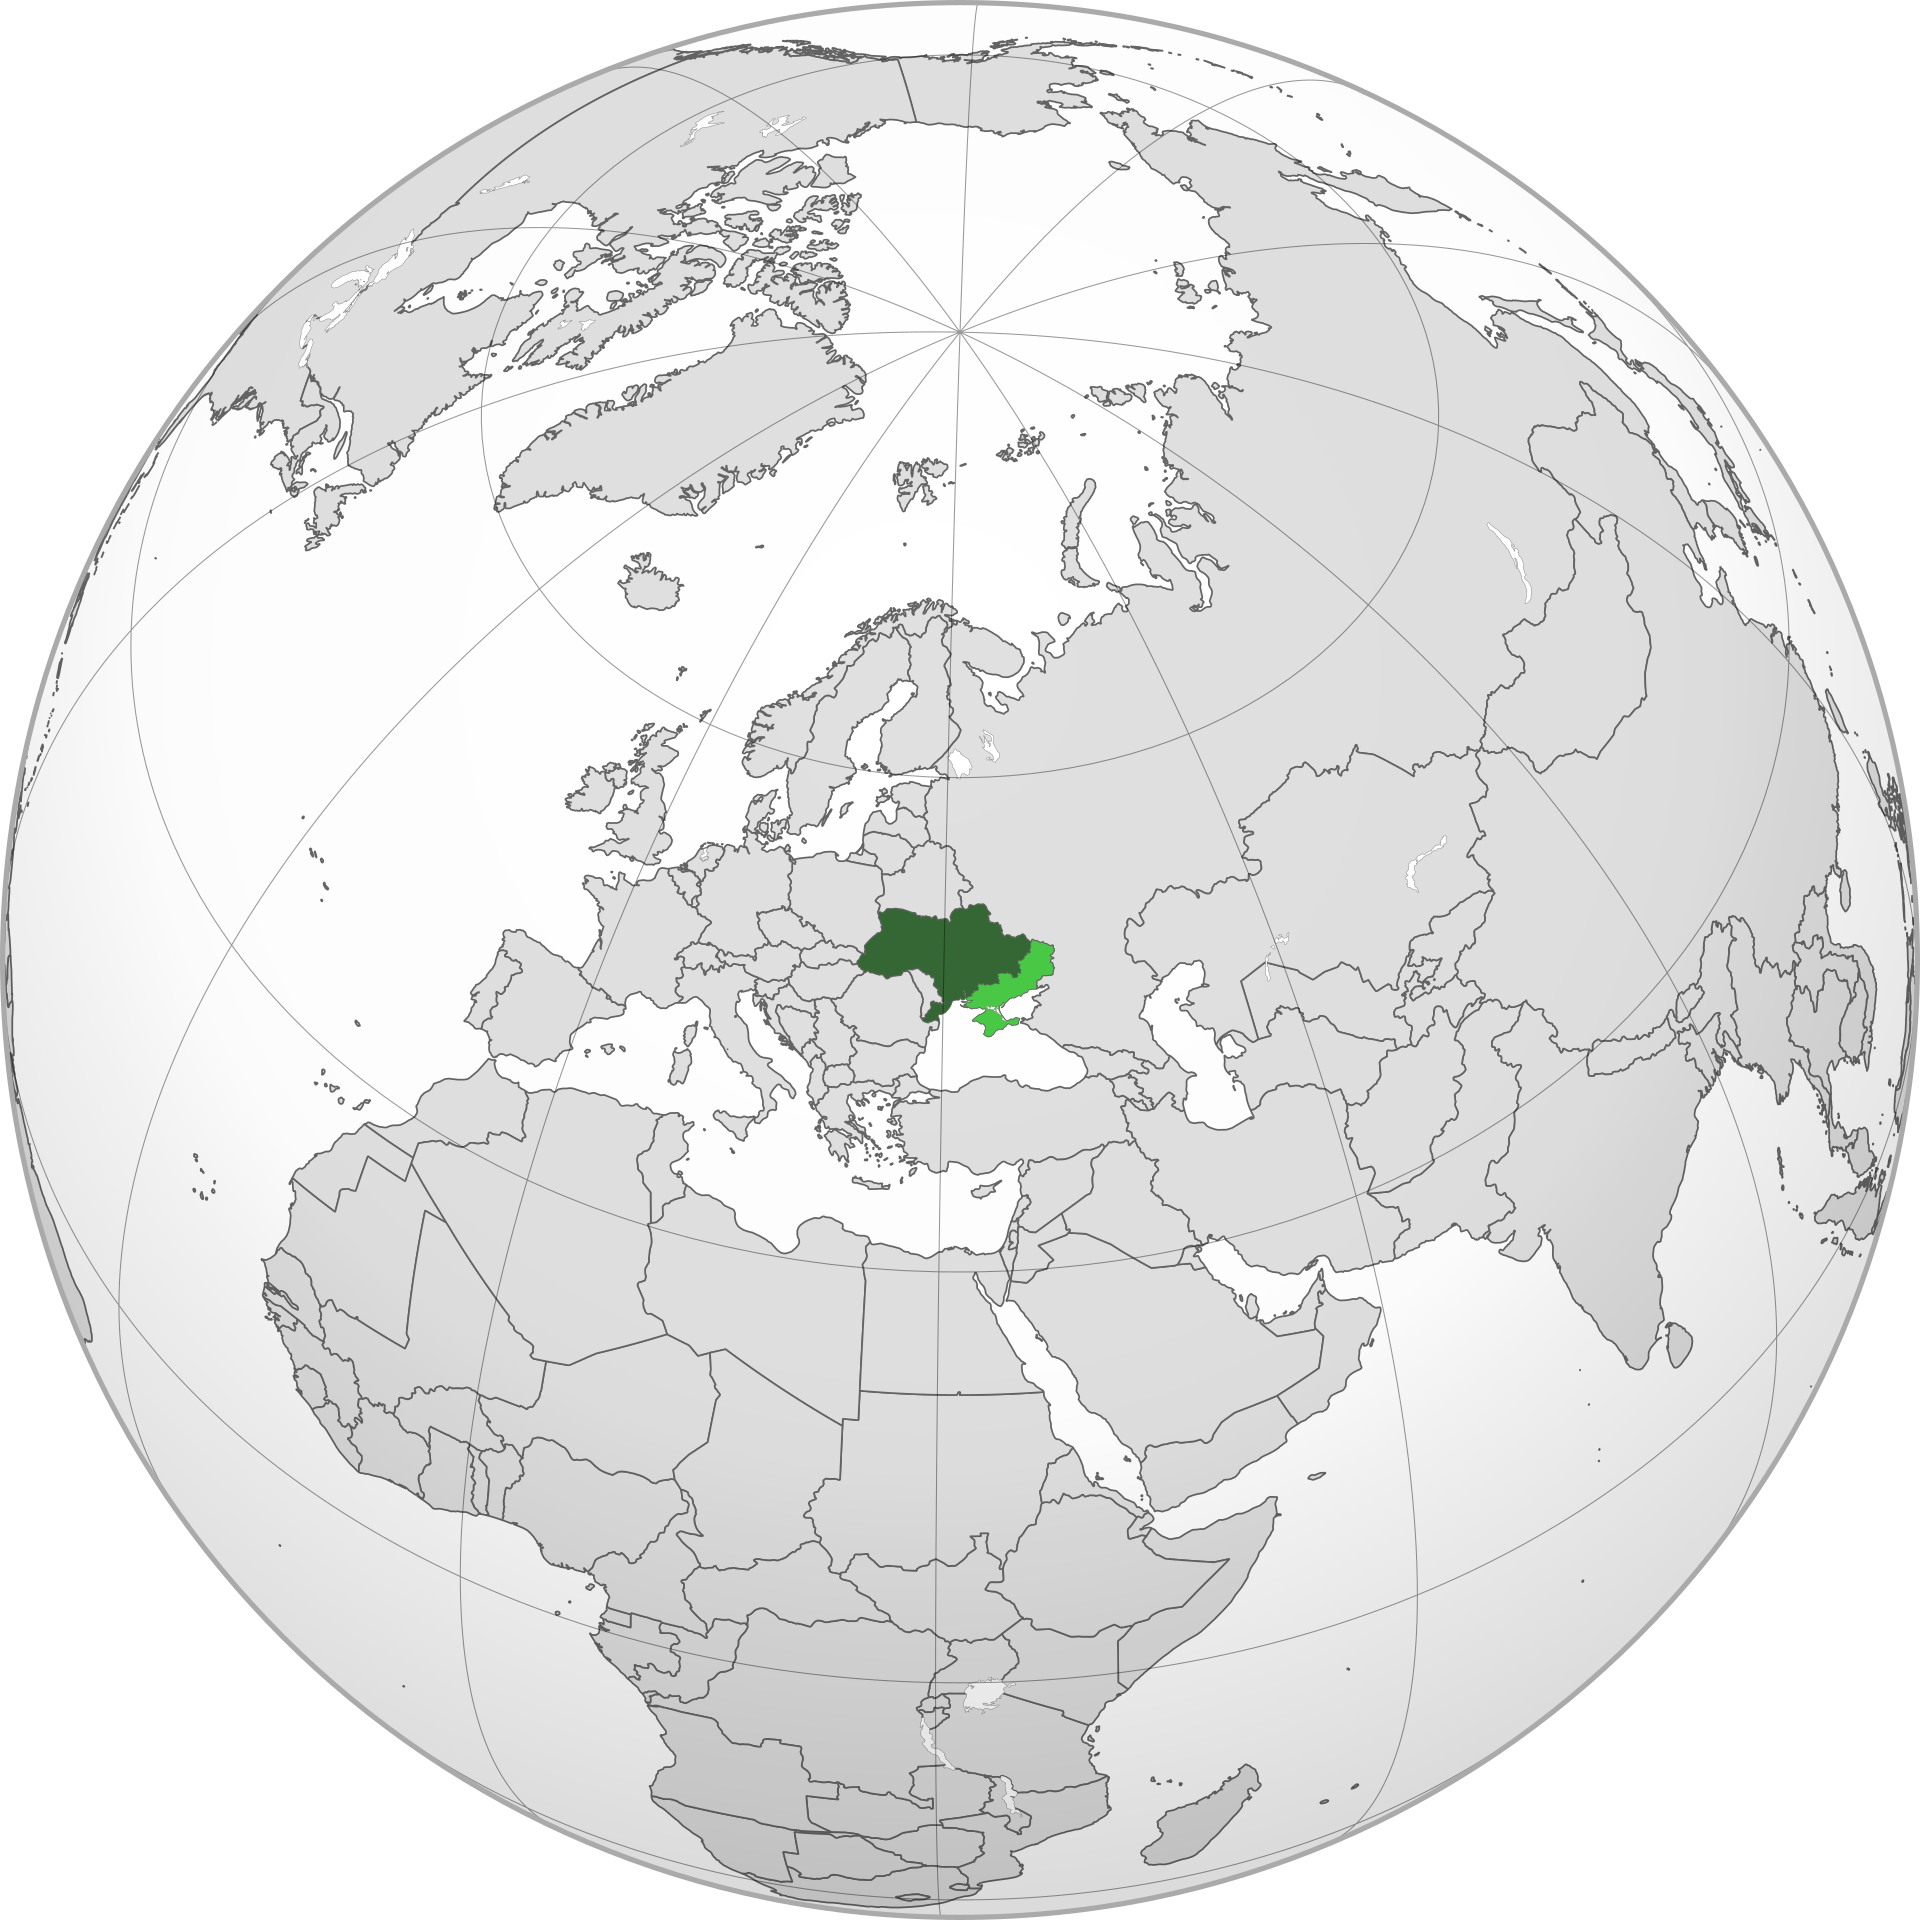 File:Ukraine map disputed.png